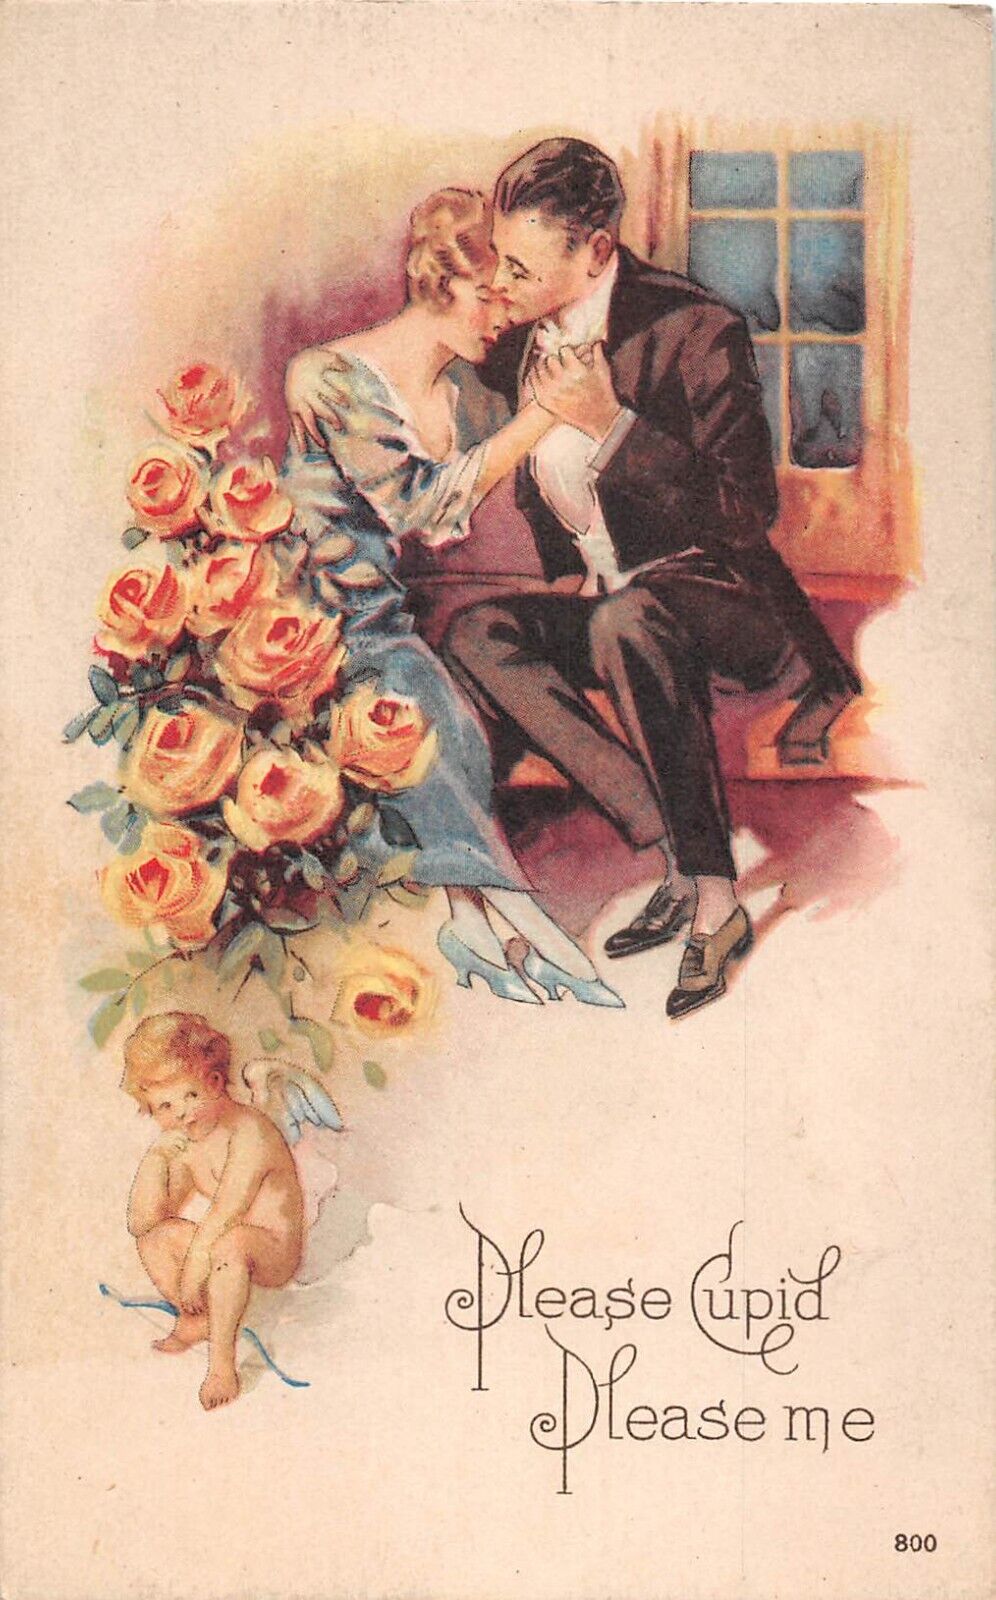 Cupid by Yellow Roses Watching Lovers Embrace-Old Art Deco Valentine PC-No. 800